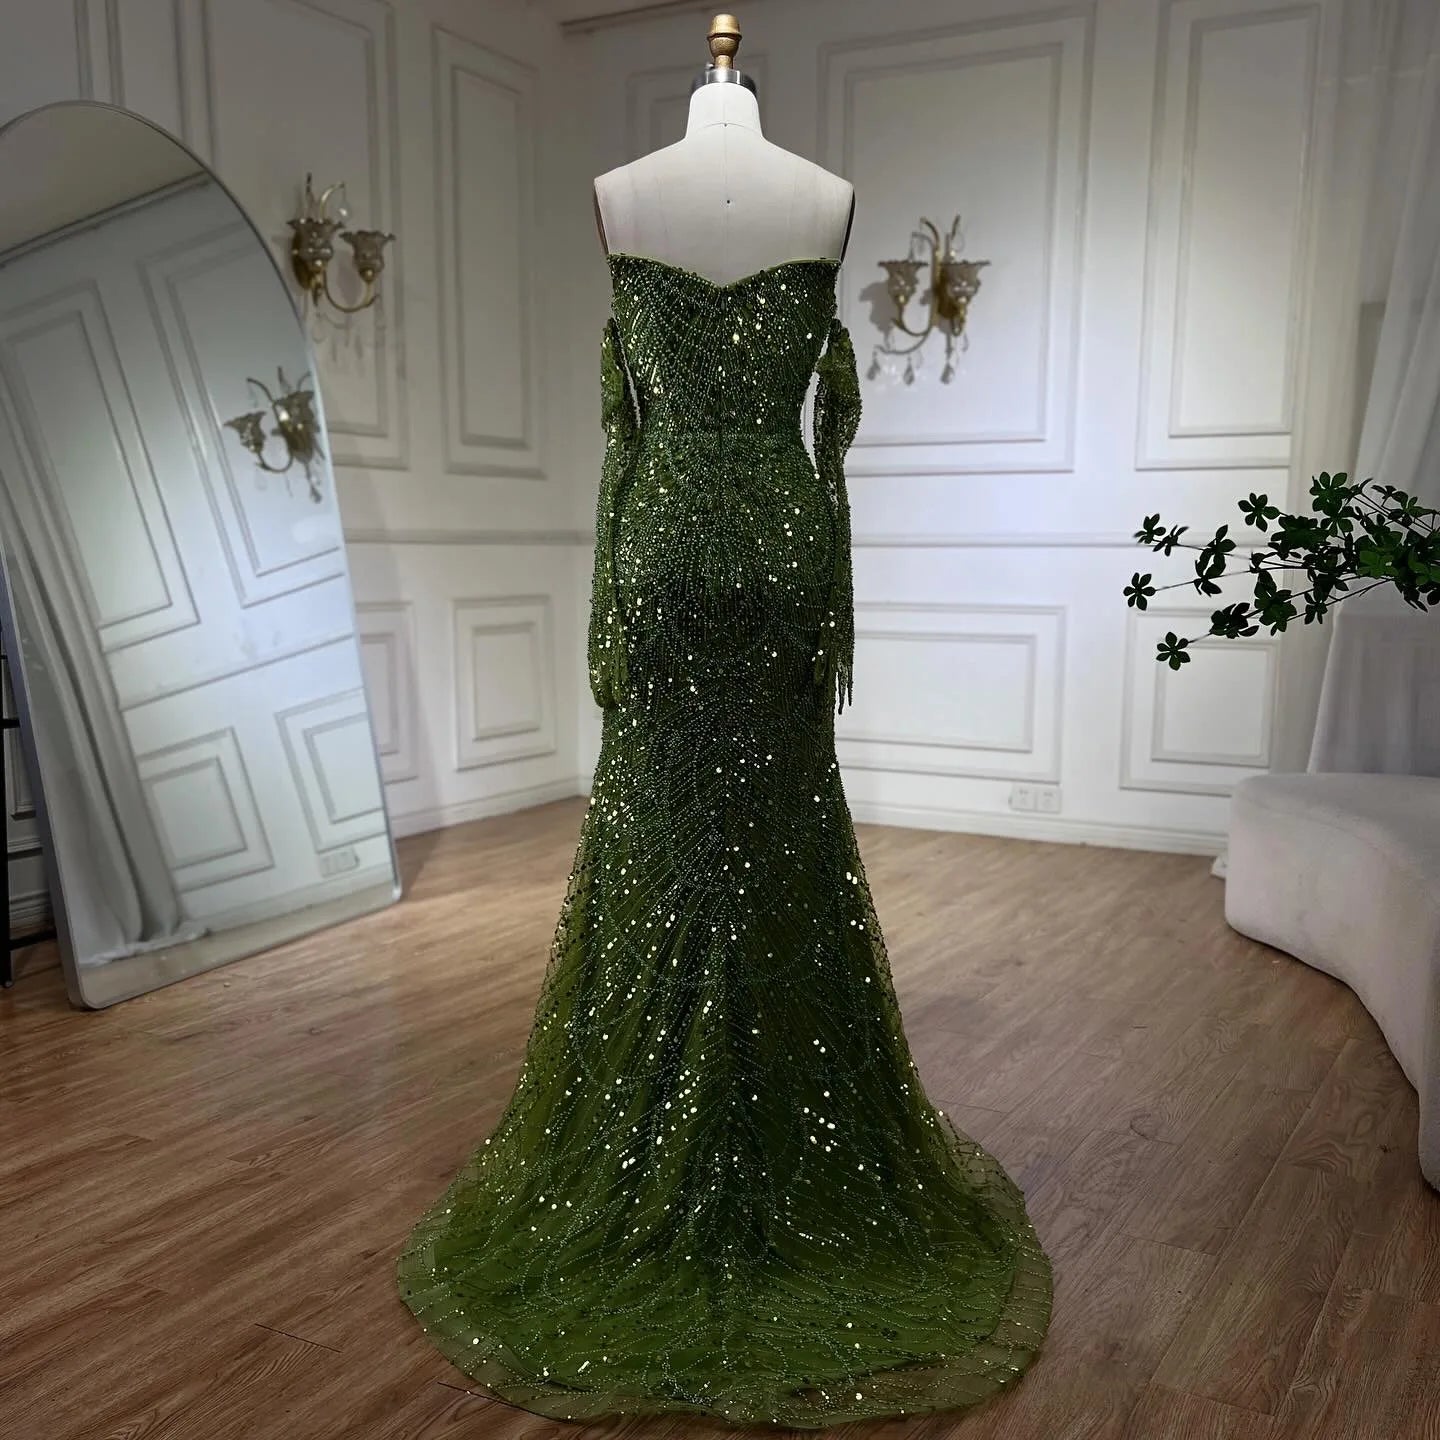 Luxury Olive Green Beaded Mermaid Evening Dress For Women Party Gown